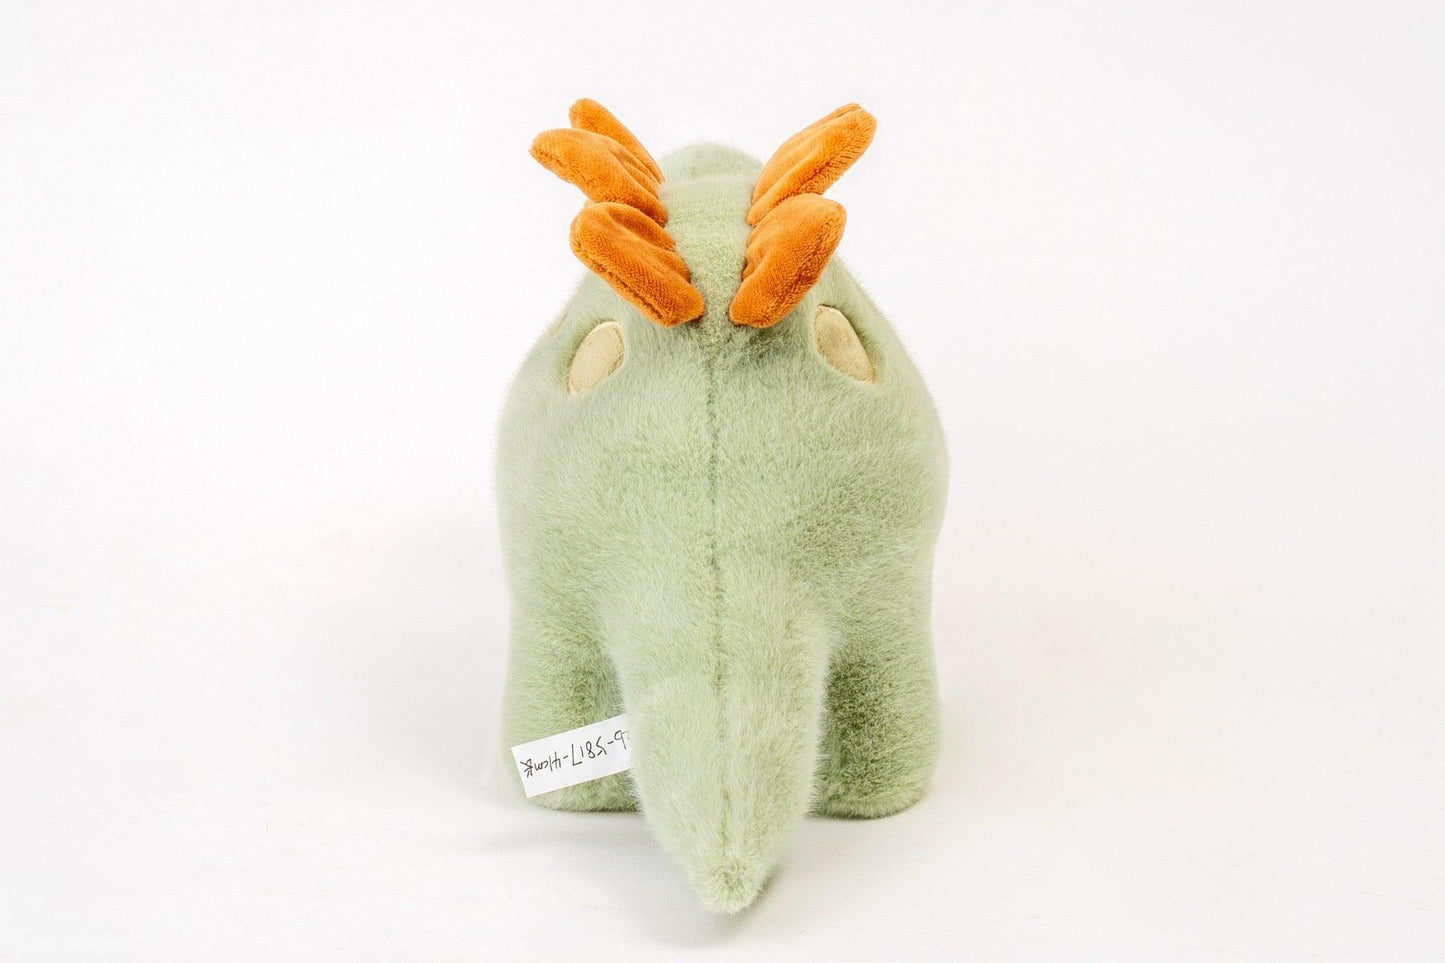 The Cutest Stegosaurus Plush Toy You'll Ever See - Plushies